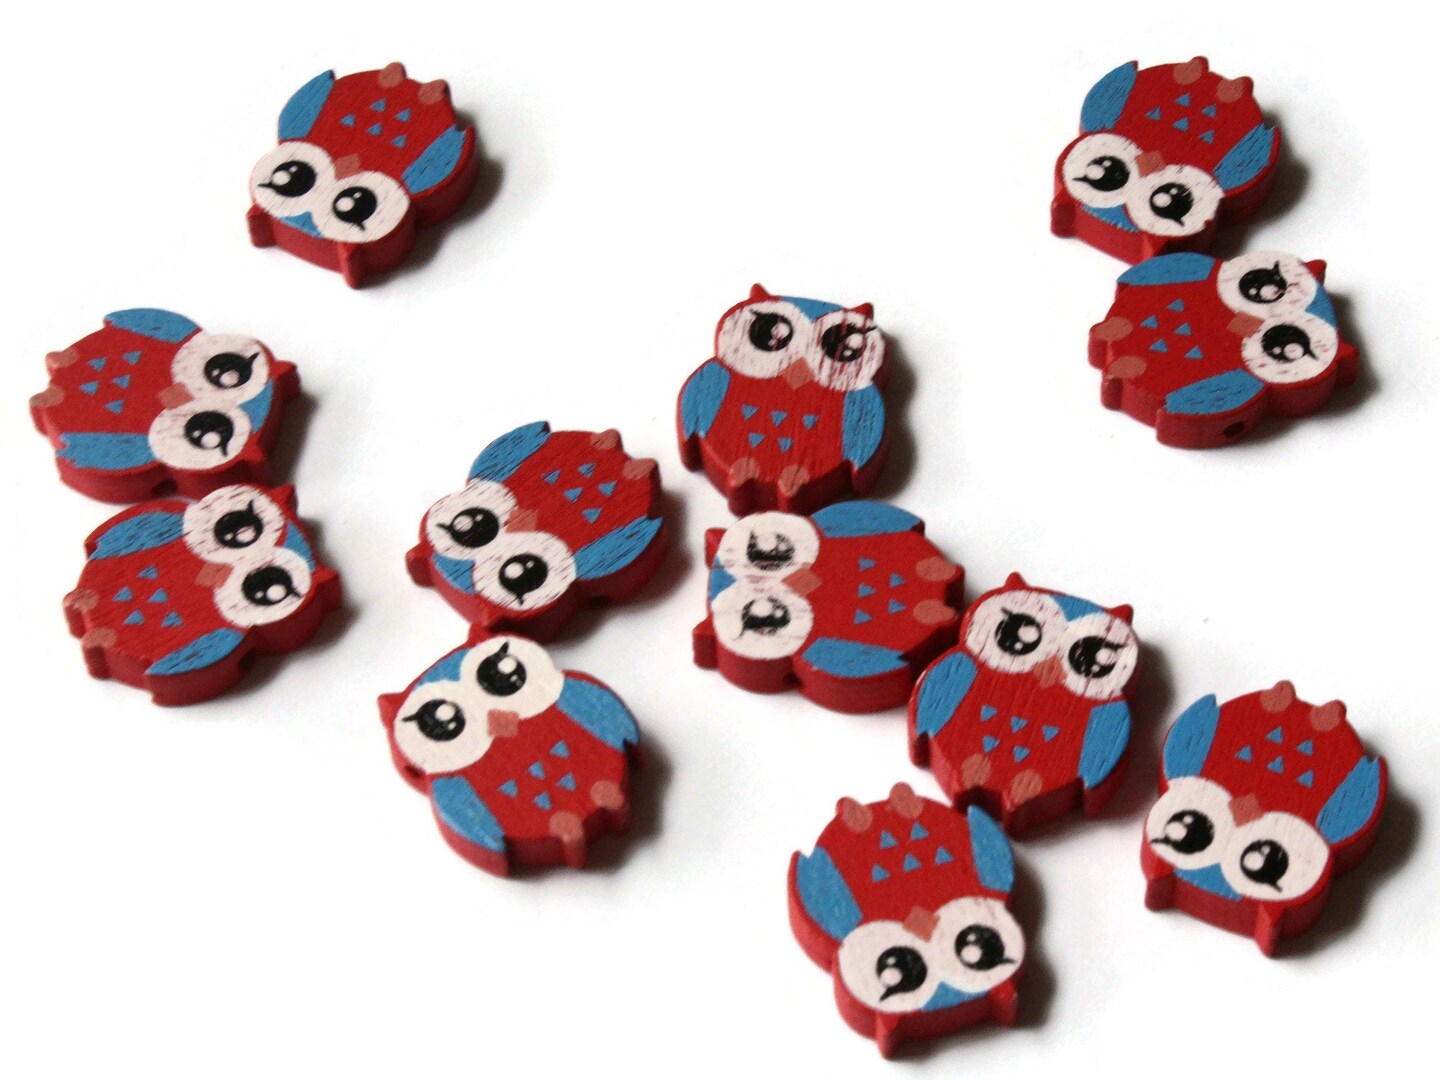 12 22mm Red Wooden Owl Beads Wood Animal Beads Cute Bird Beads Novelty Beads to String